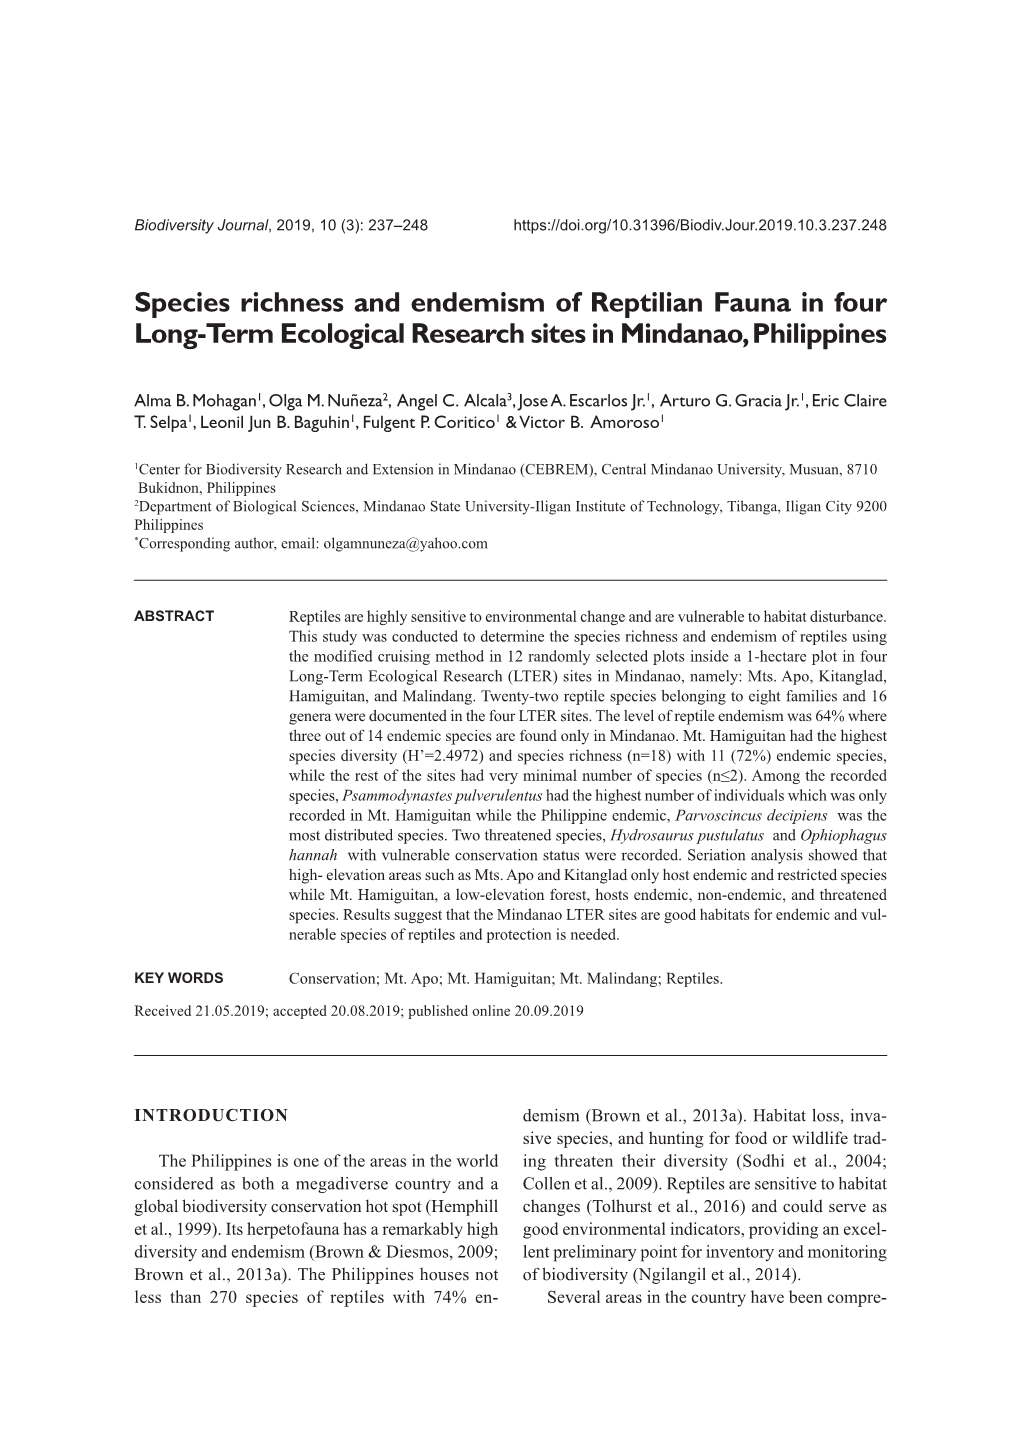 Species Richness and Endemism of Reptilian Fauna in Four Long-Term Ecological Research Sites in Mindanao, Philippines